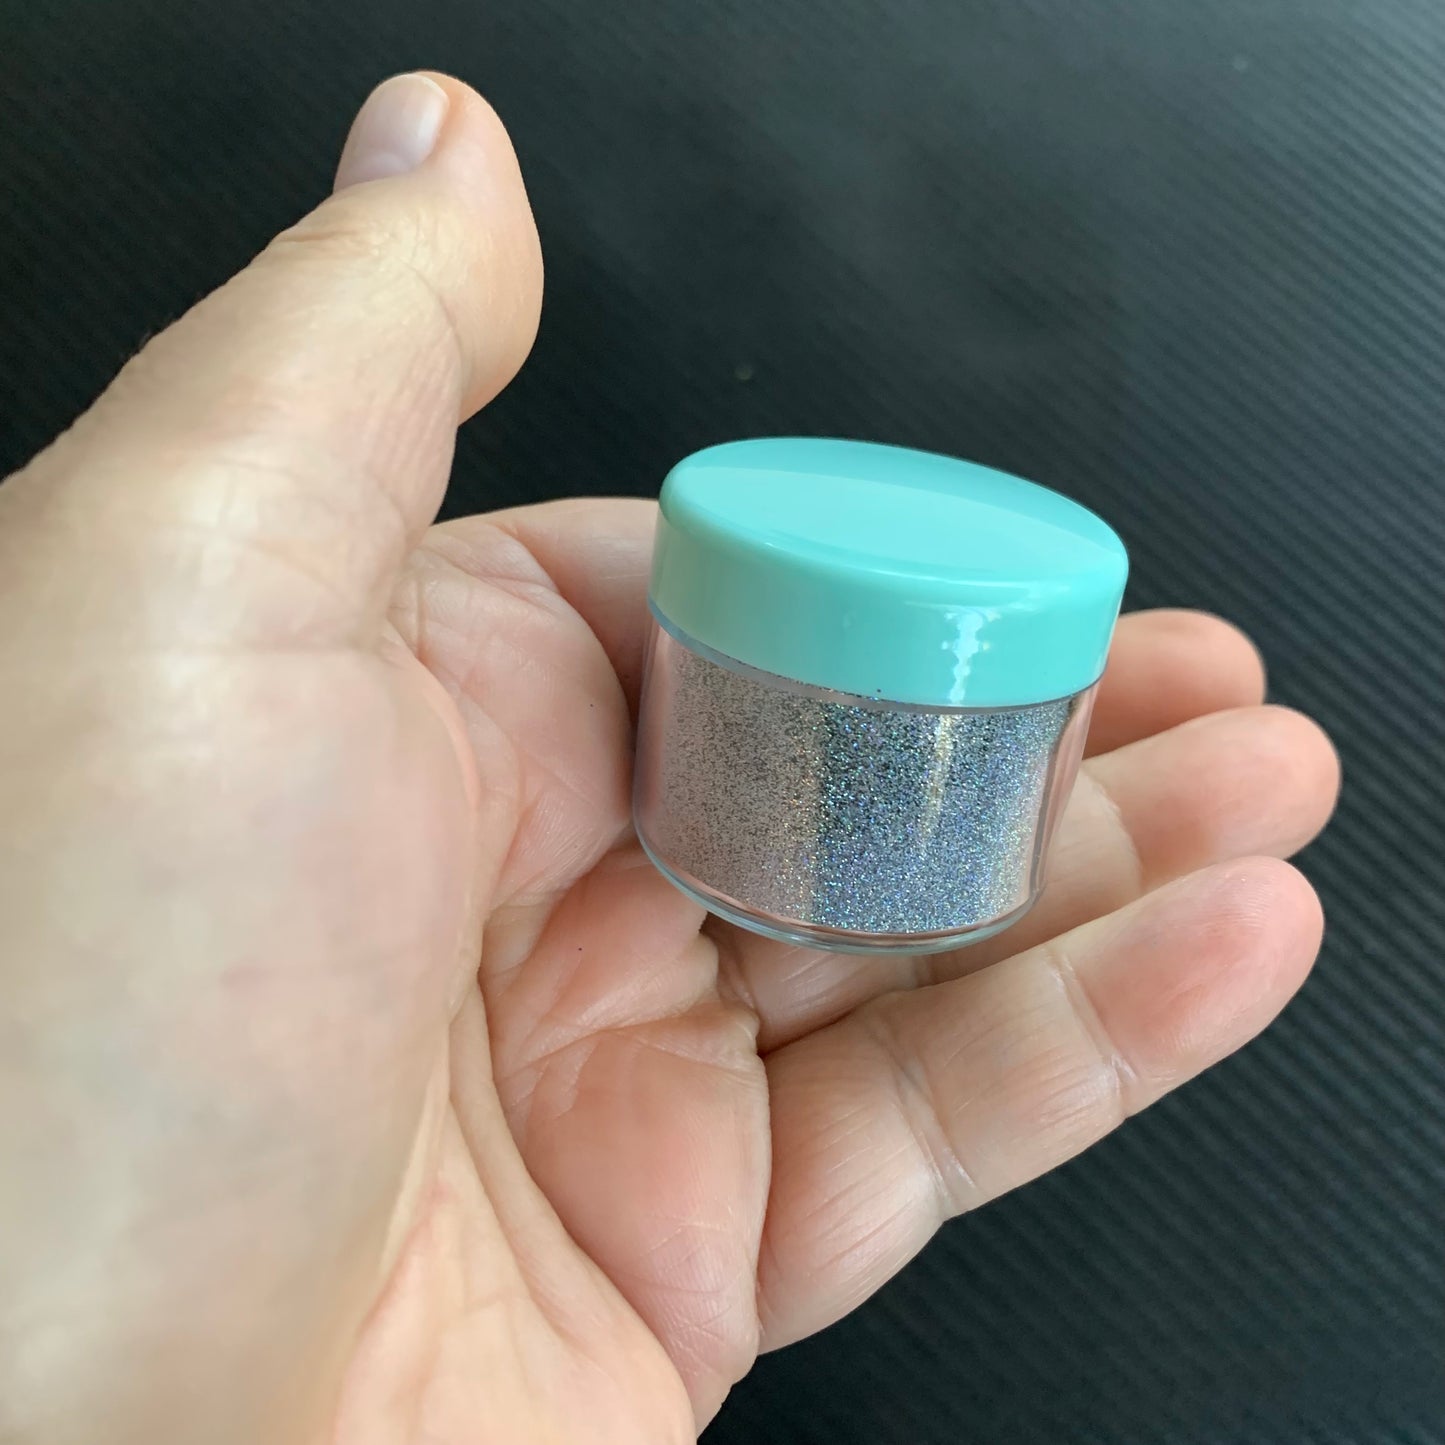 Holographic Glitter Superfine Bake-able 6 colors for Polymer Clay Resin Mixed Media